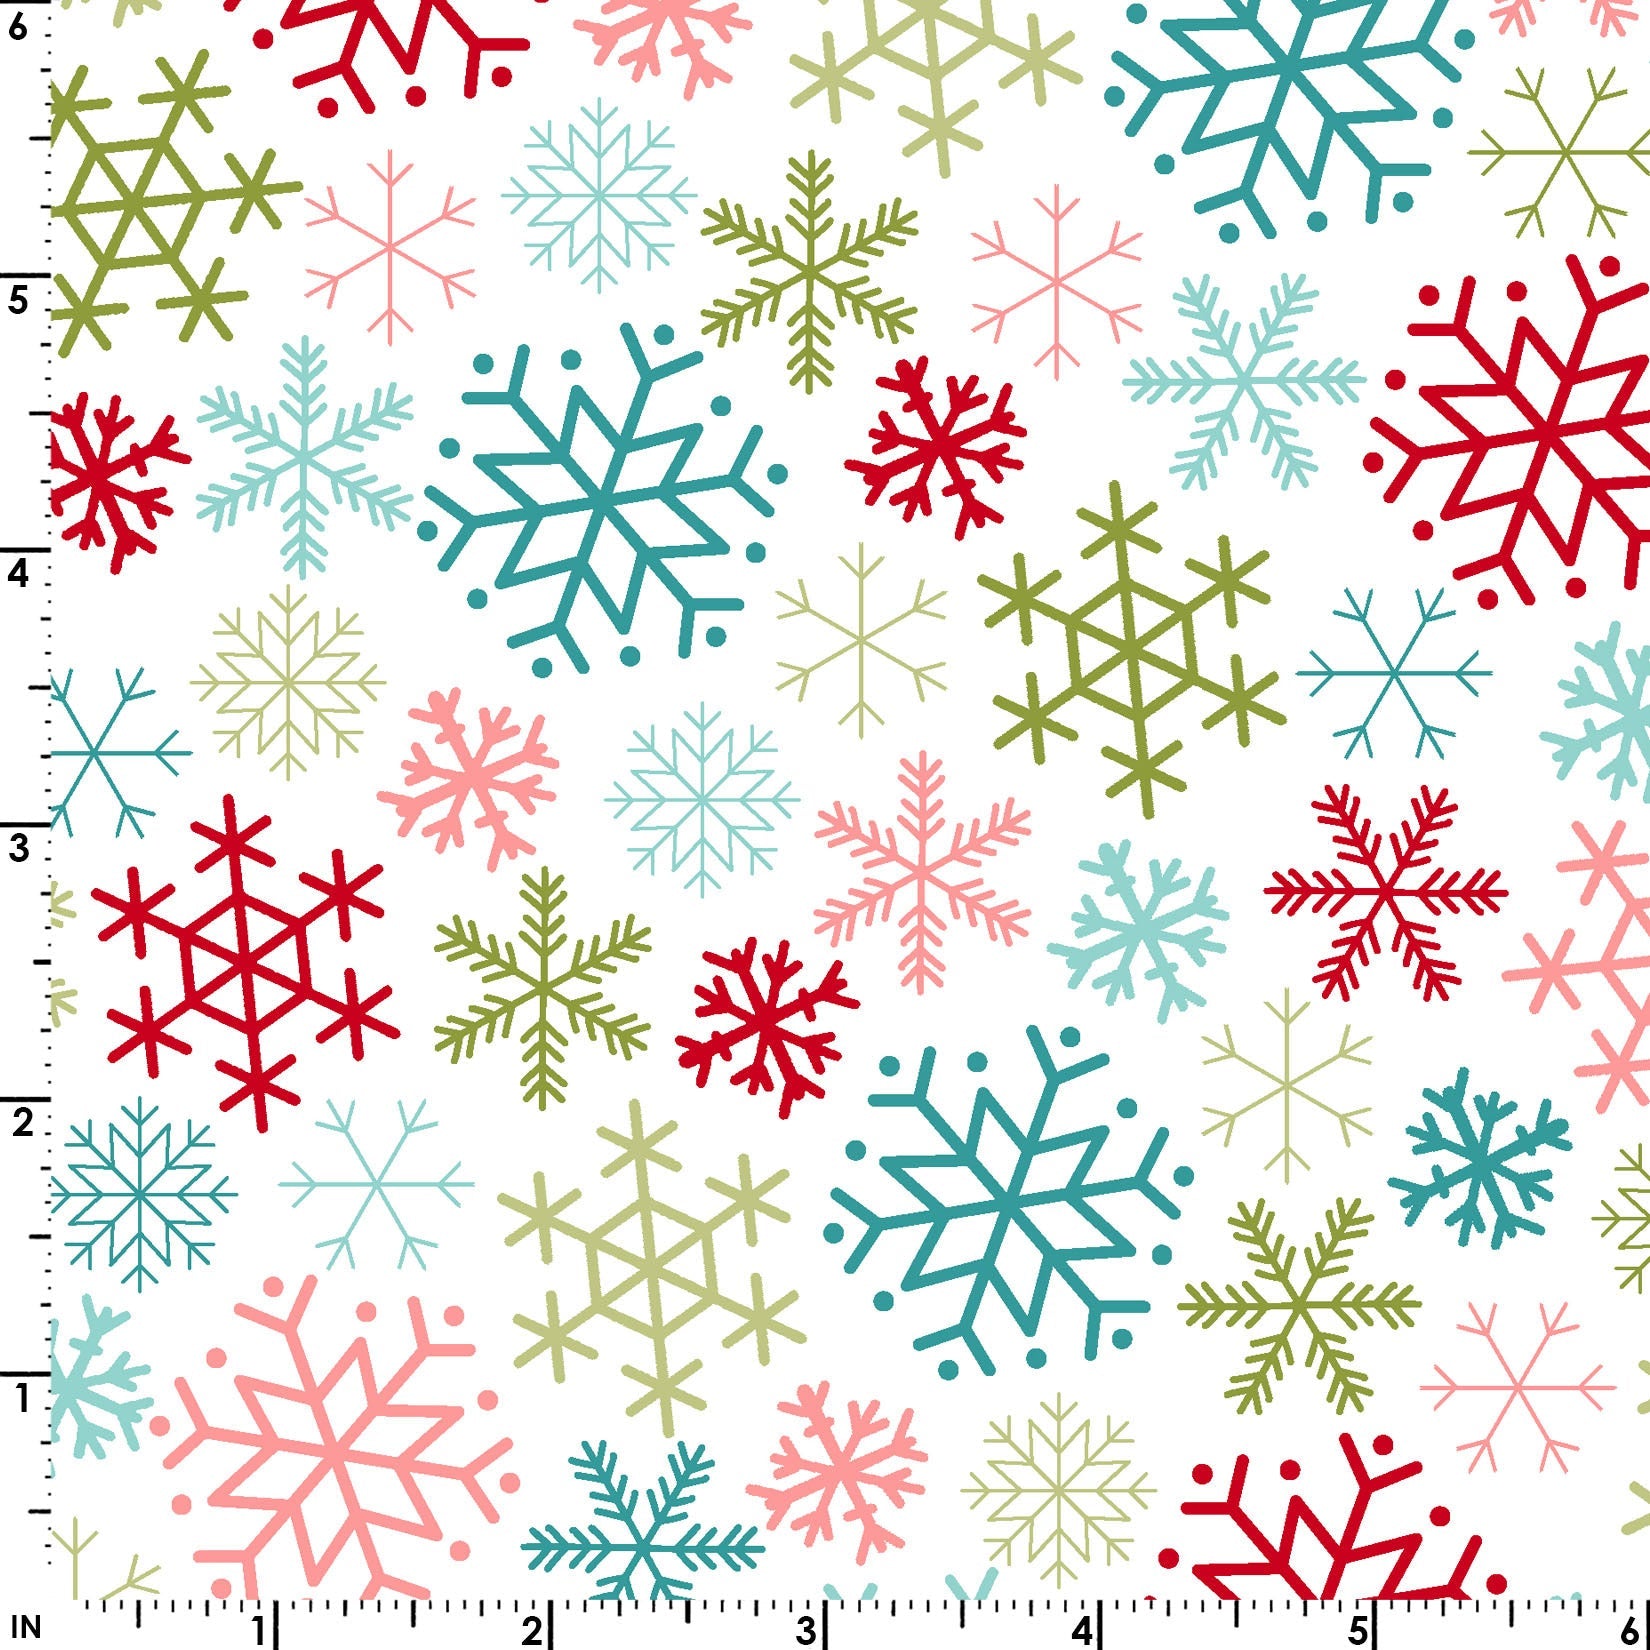 This delightful print features multiples sizes and shapes in light and dark shades or pink/red, green, teal, and blue on a white background. This blizzard of Snowflakes on white (MAS10205-Z) is part of the Cup of Cheer fabric line designed by Kim Christopherson of Kimberbell Designs for Maywood Studios.